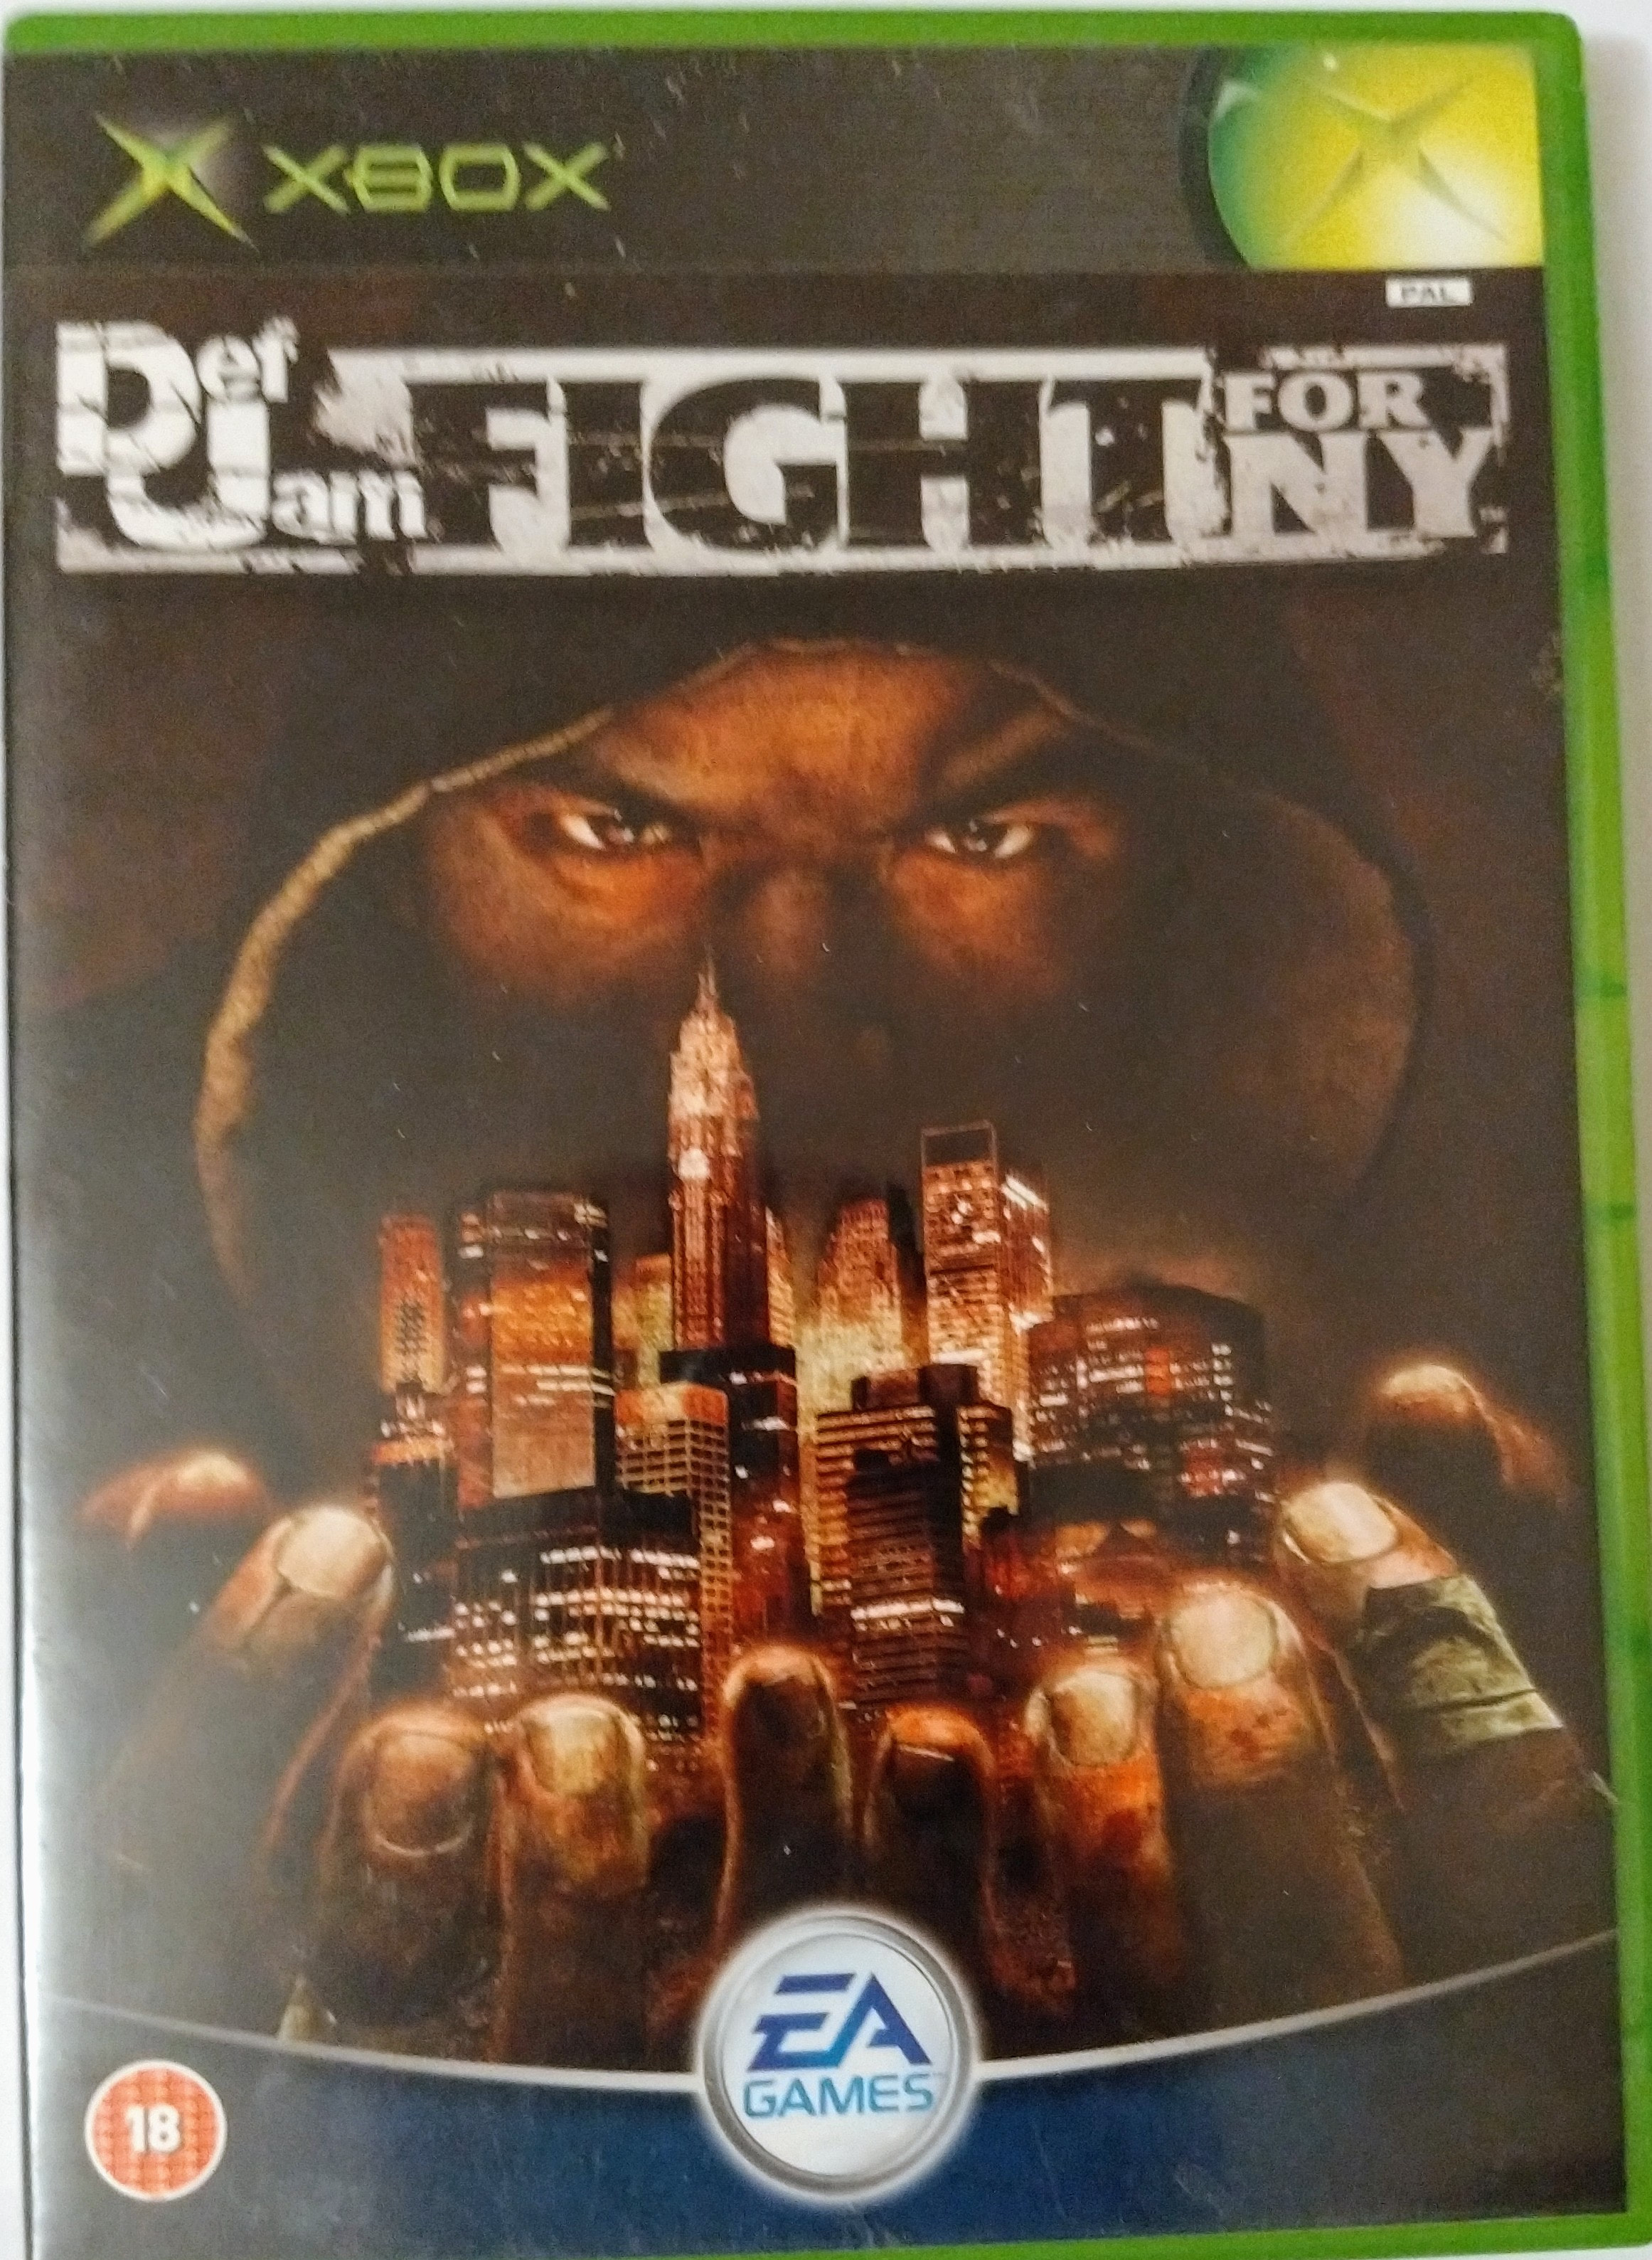 xbox def jam fight for ny